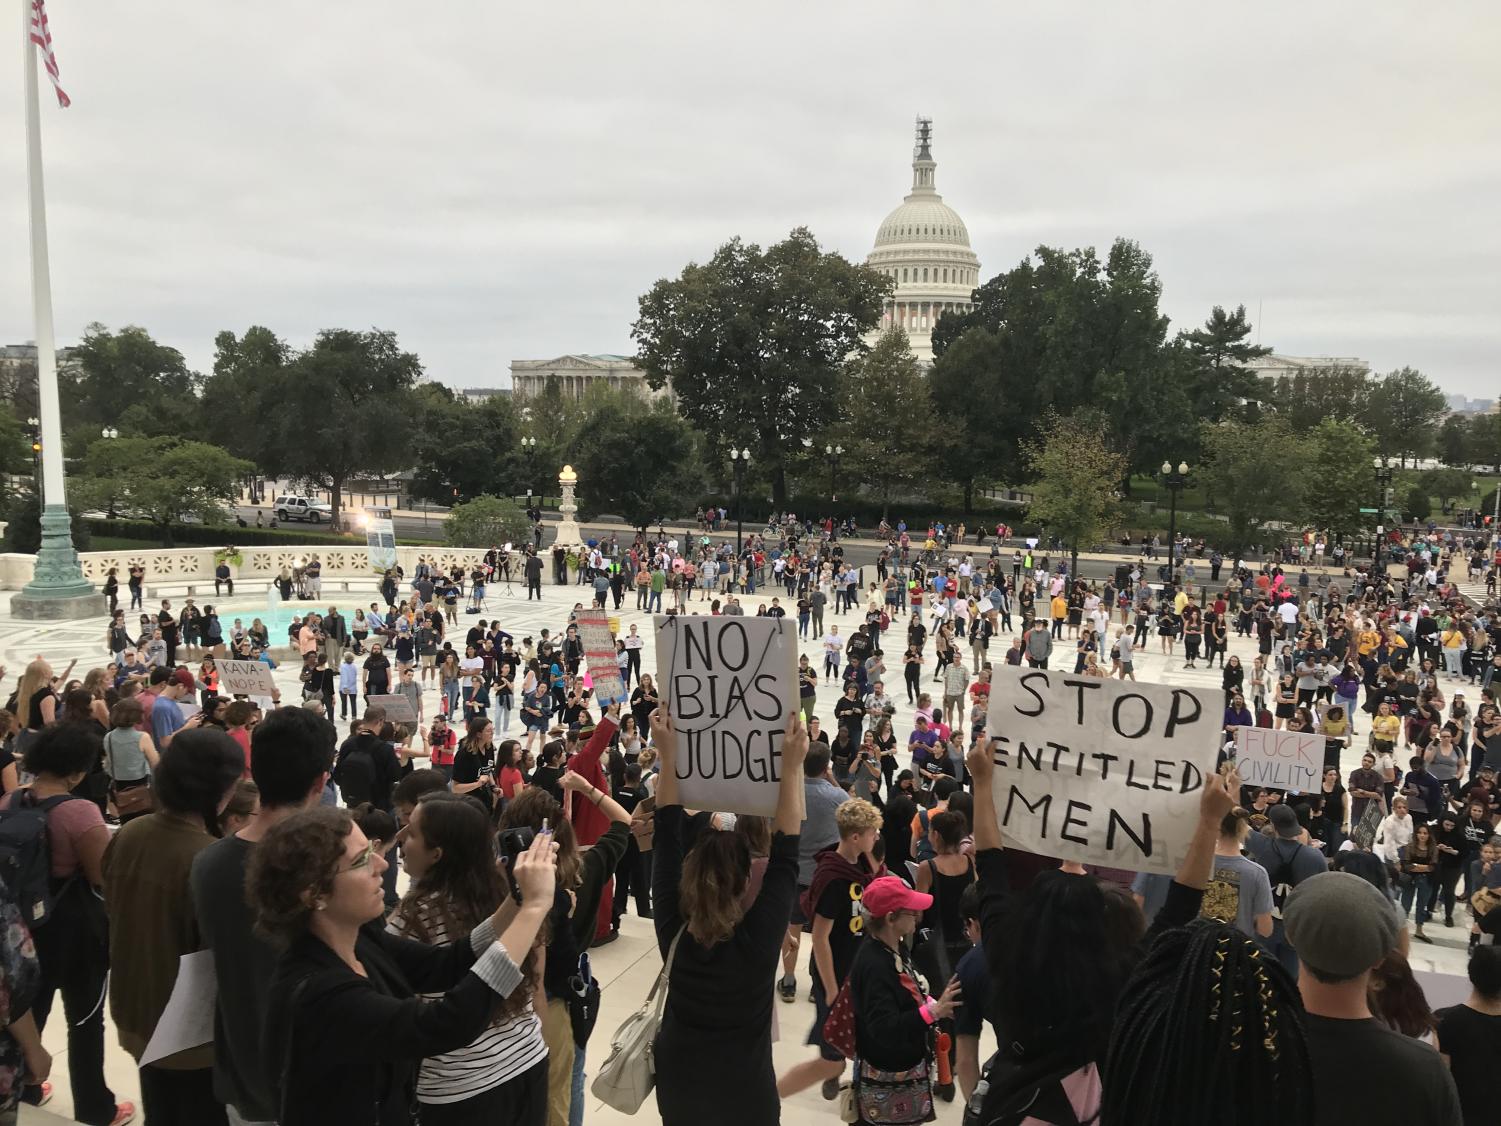 Protesters+object+to+Kavanaugh+confirmation+outside+Supreme+Court